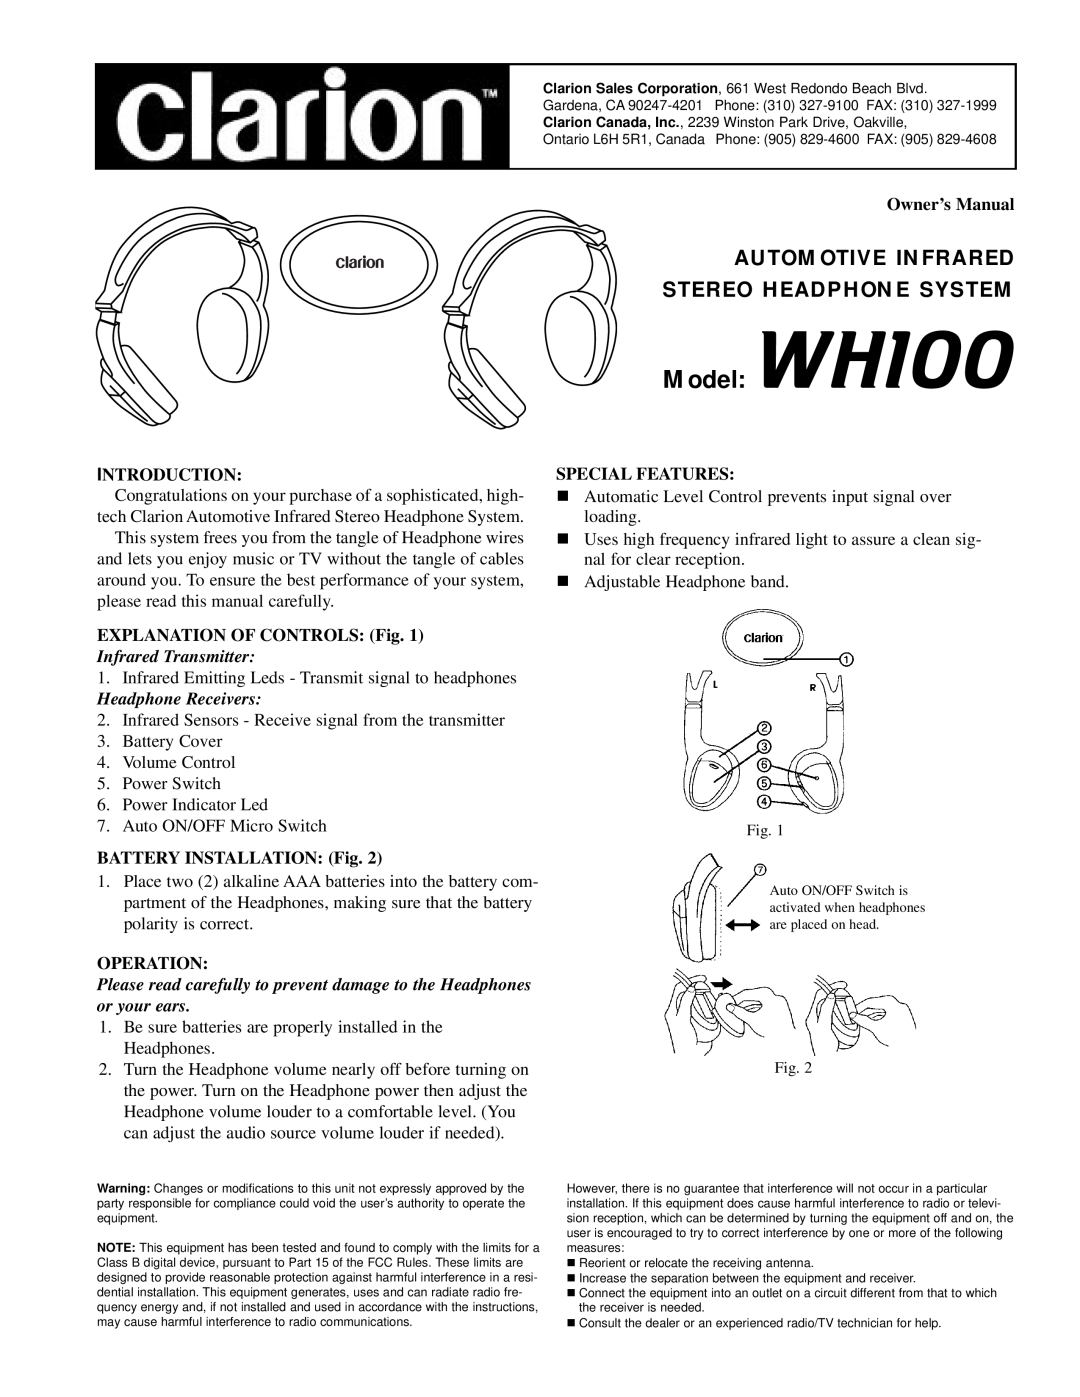 Clarion owner manual Model WH100, Automotive Infrared Stereo Headphone System, Introduction, Infrared Transmitter 